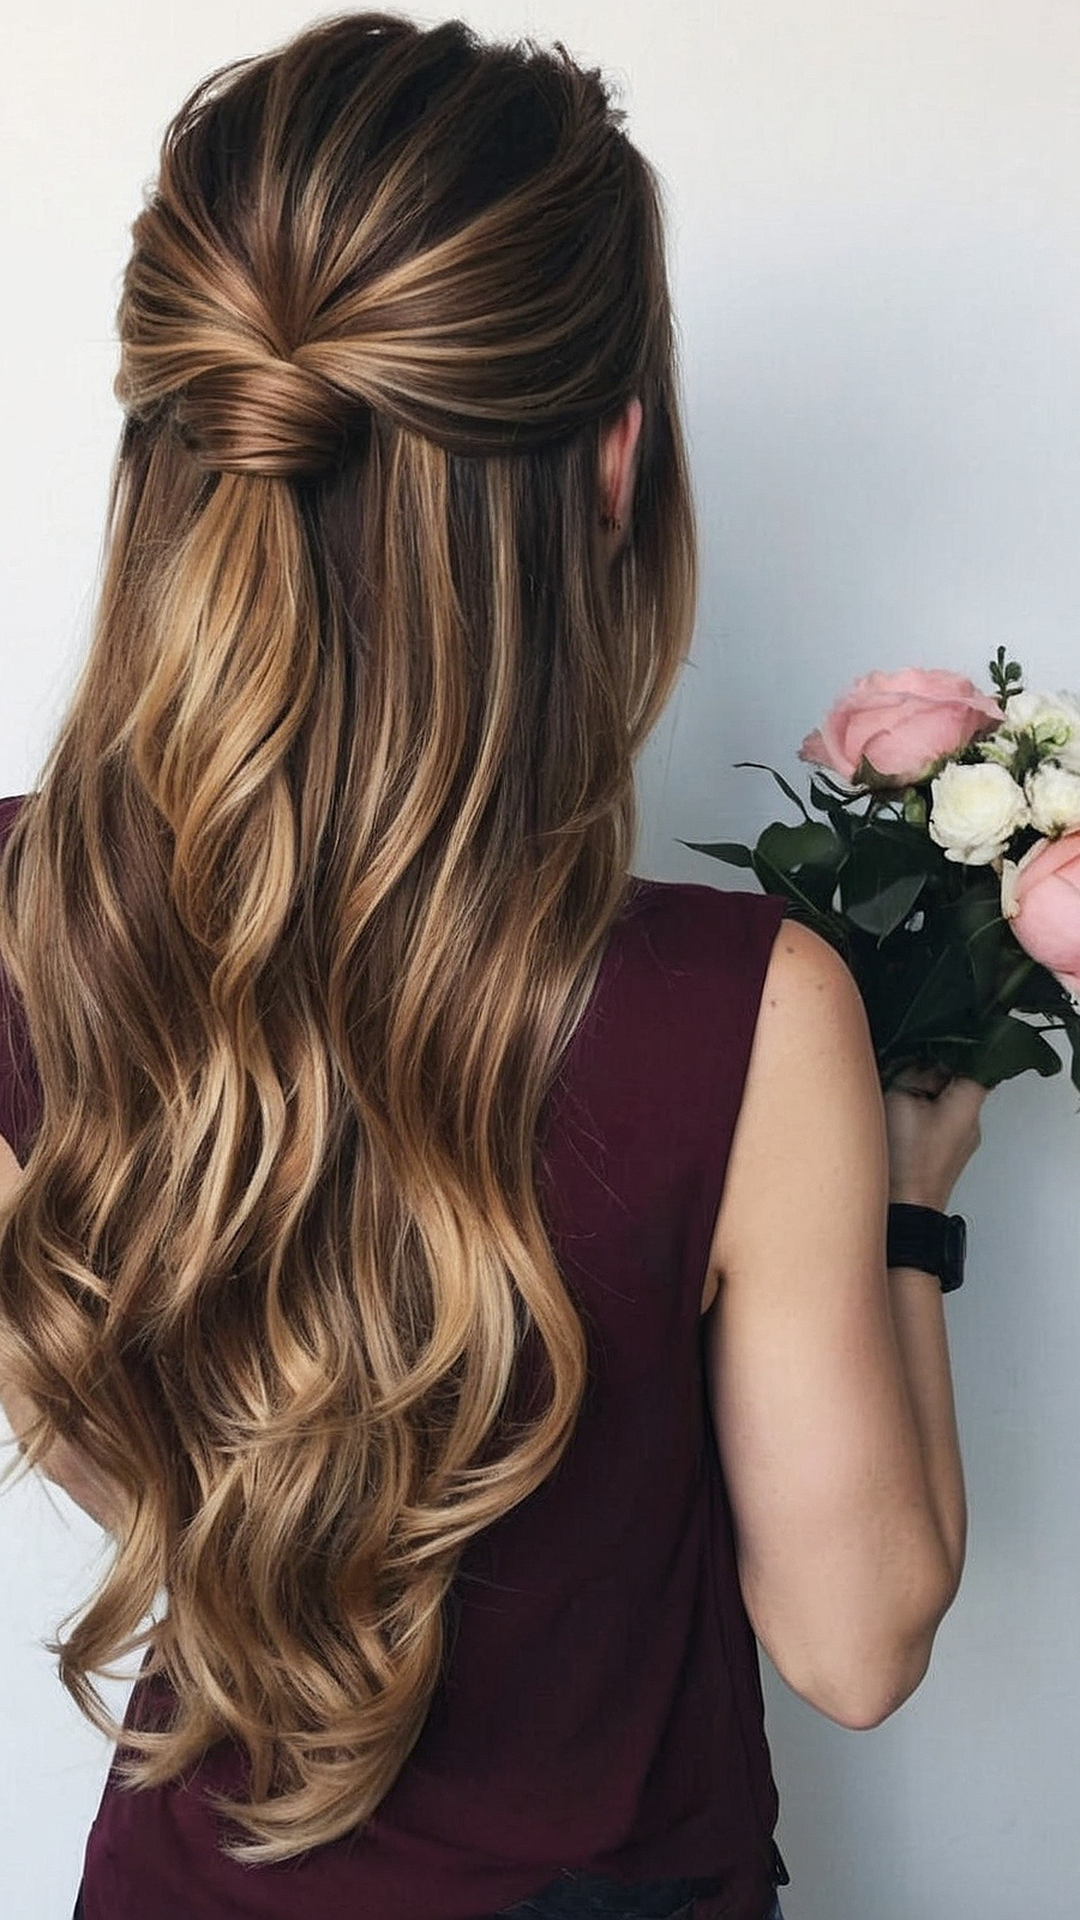 Palm Paradise: Dreamy Summer Hairstyles for Every Occasion